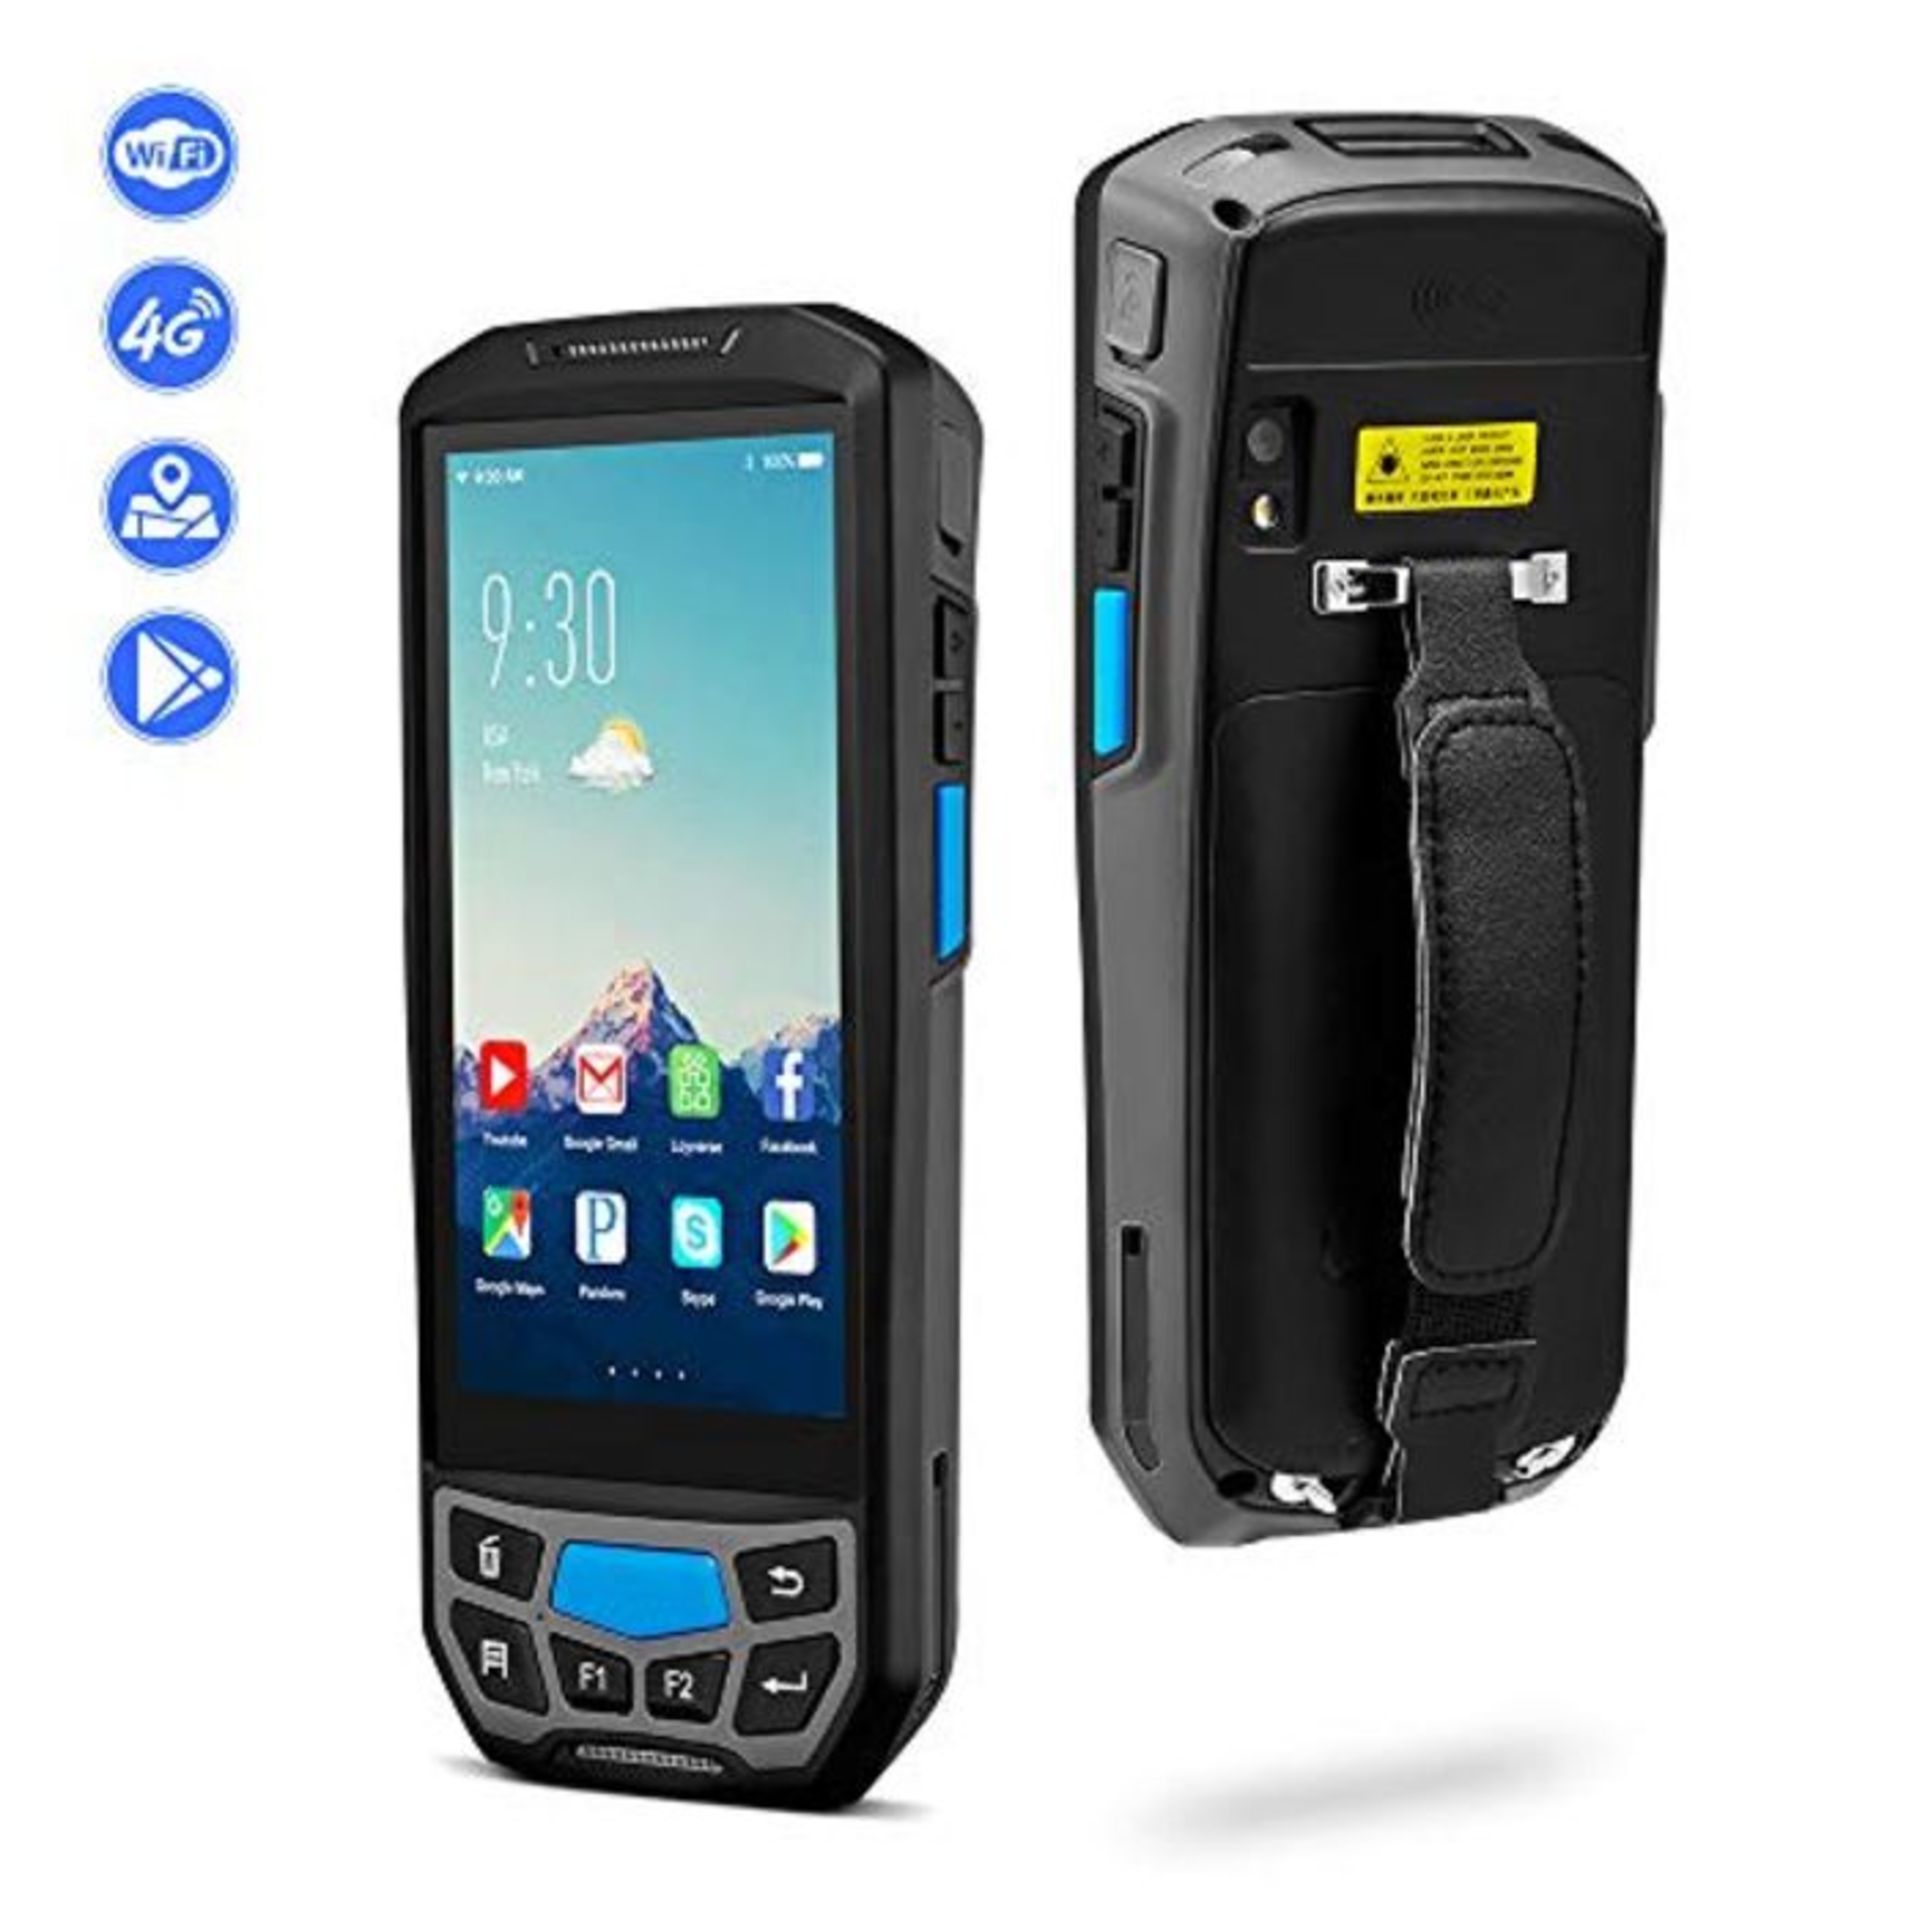 RRP £390.00 [Warehouse Scanner] Rugged Handheld Barcode Scanner Mobile Computer IP65 with Android